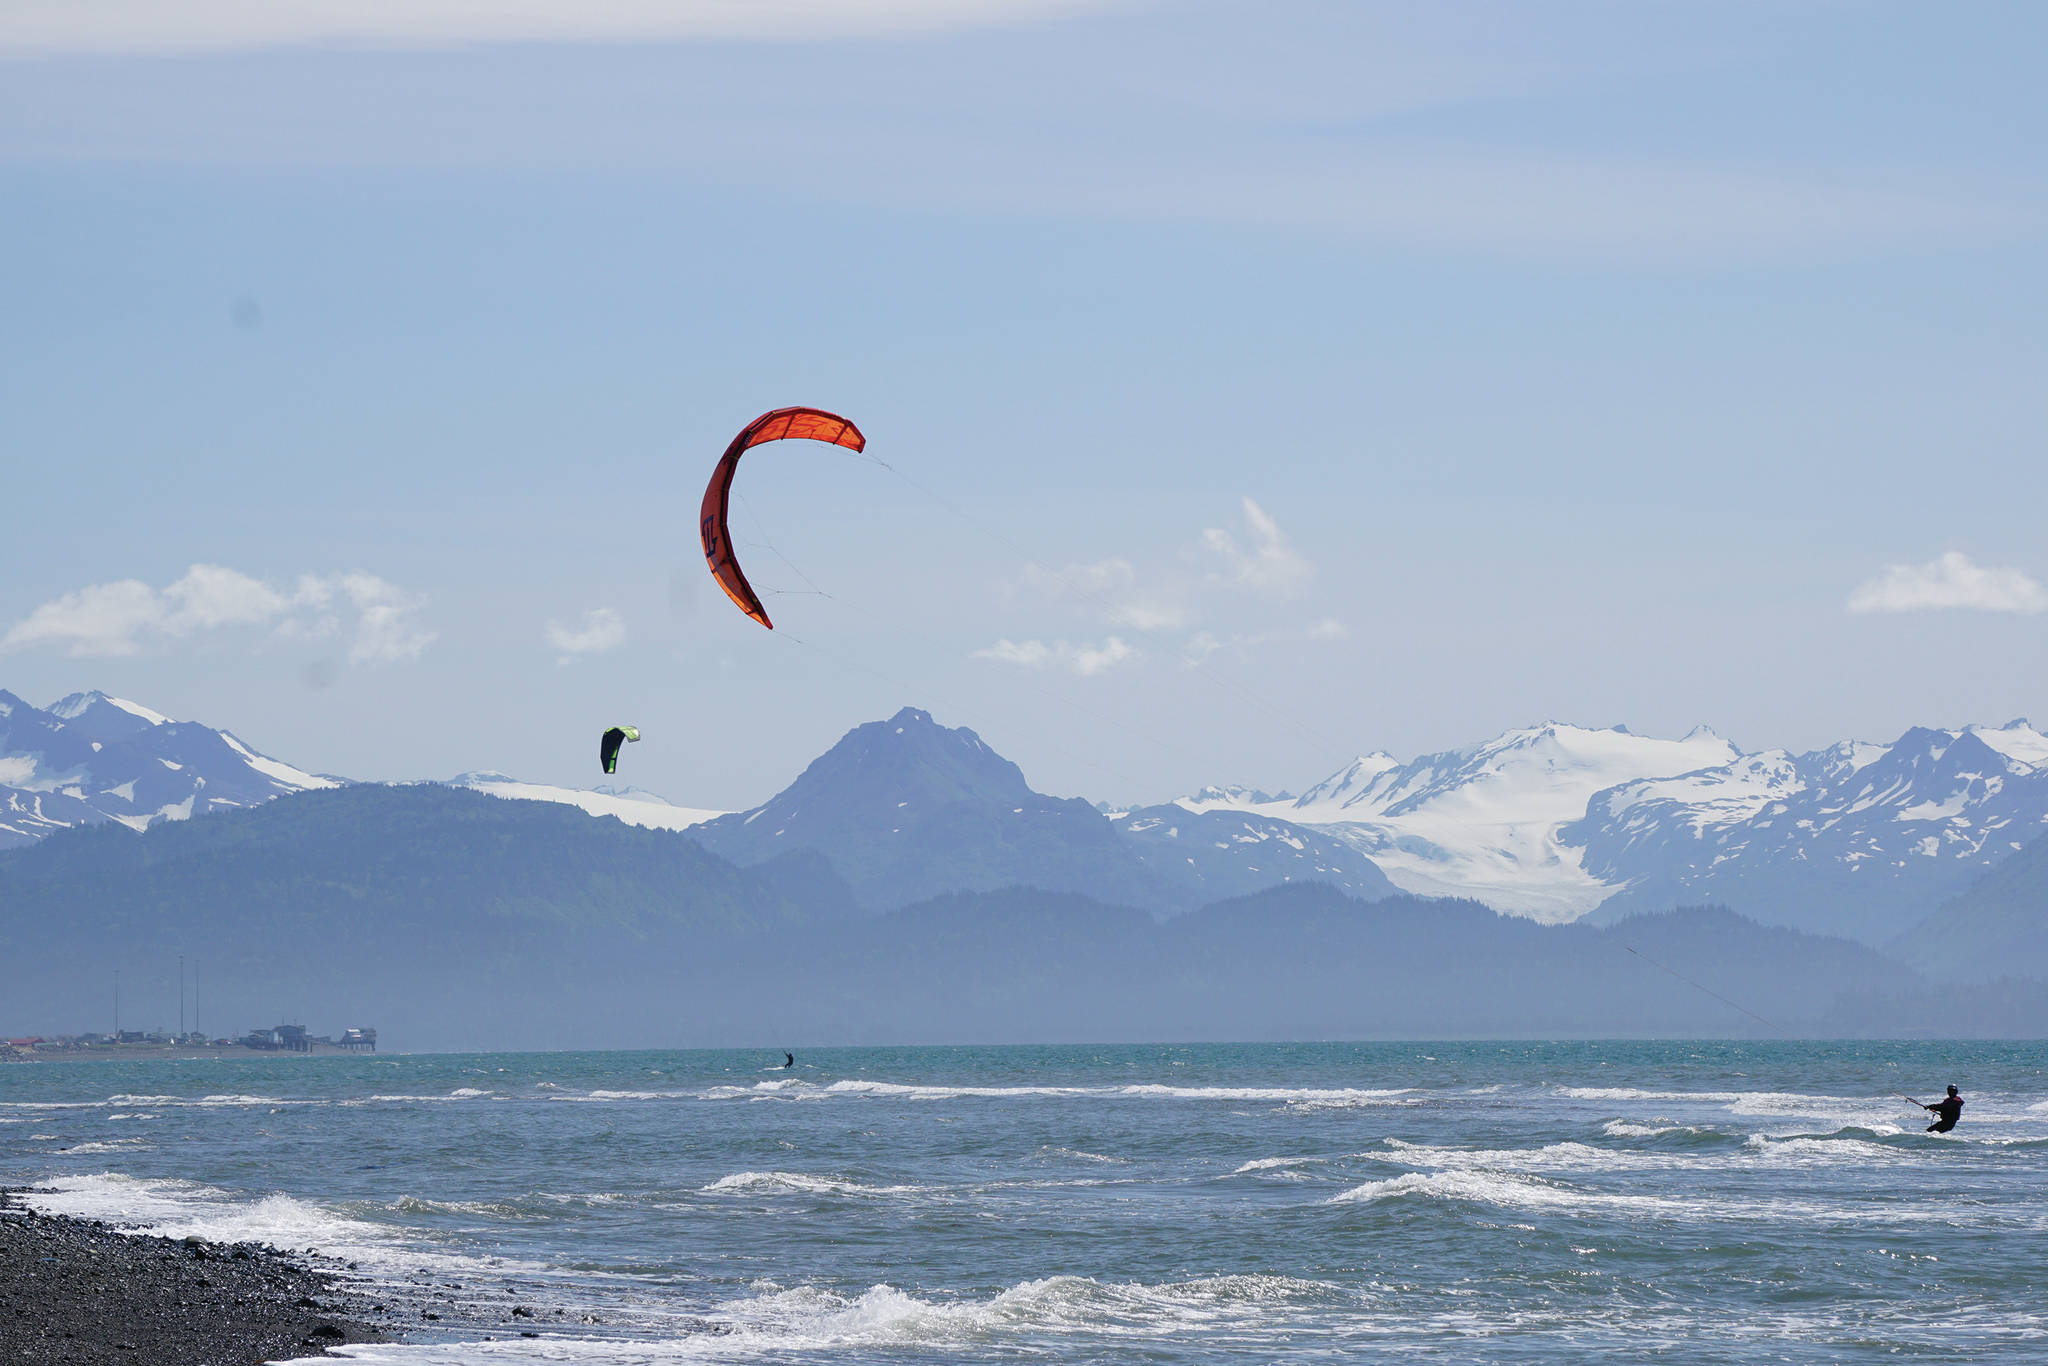 Two kiteboarders play in the wind and surf on Tuesday, June 30, 2020, off the Homer Spit in Homer, Alaska. (Photo by Michael Armstrong/Homer News)